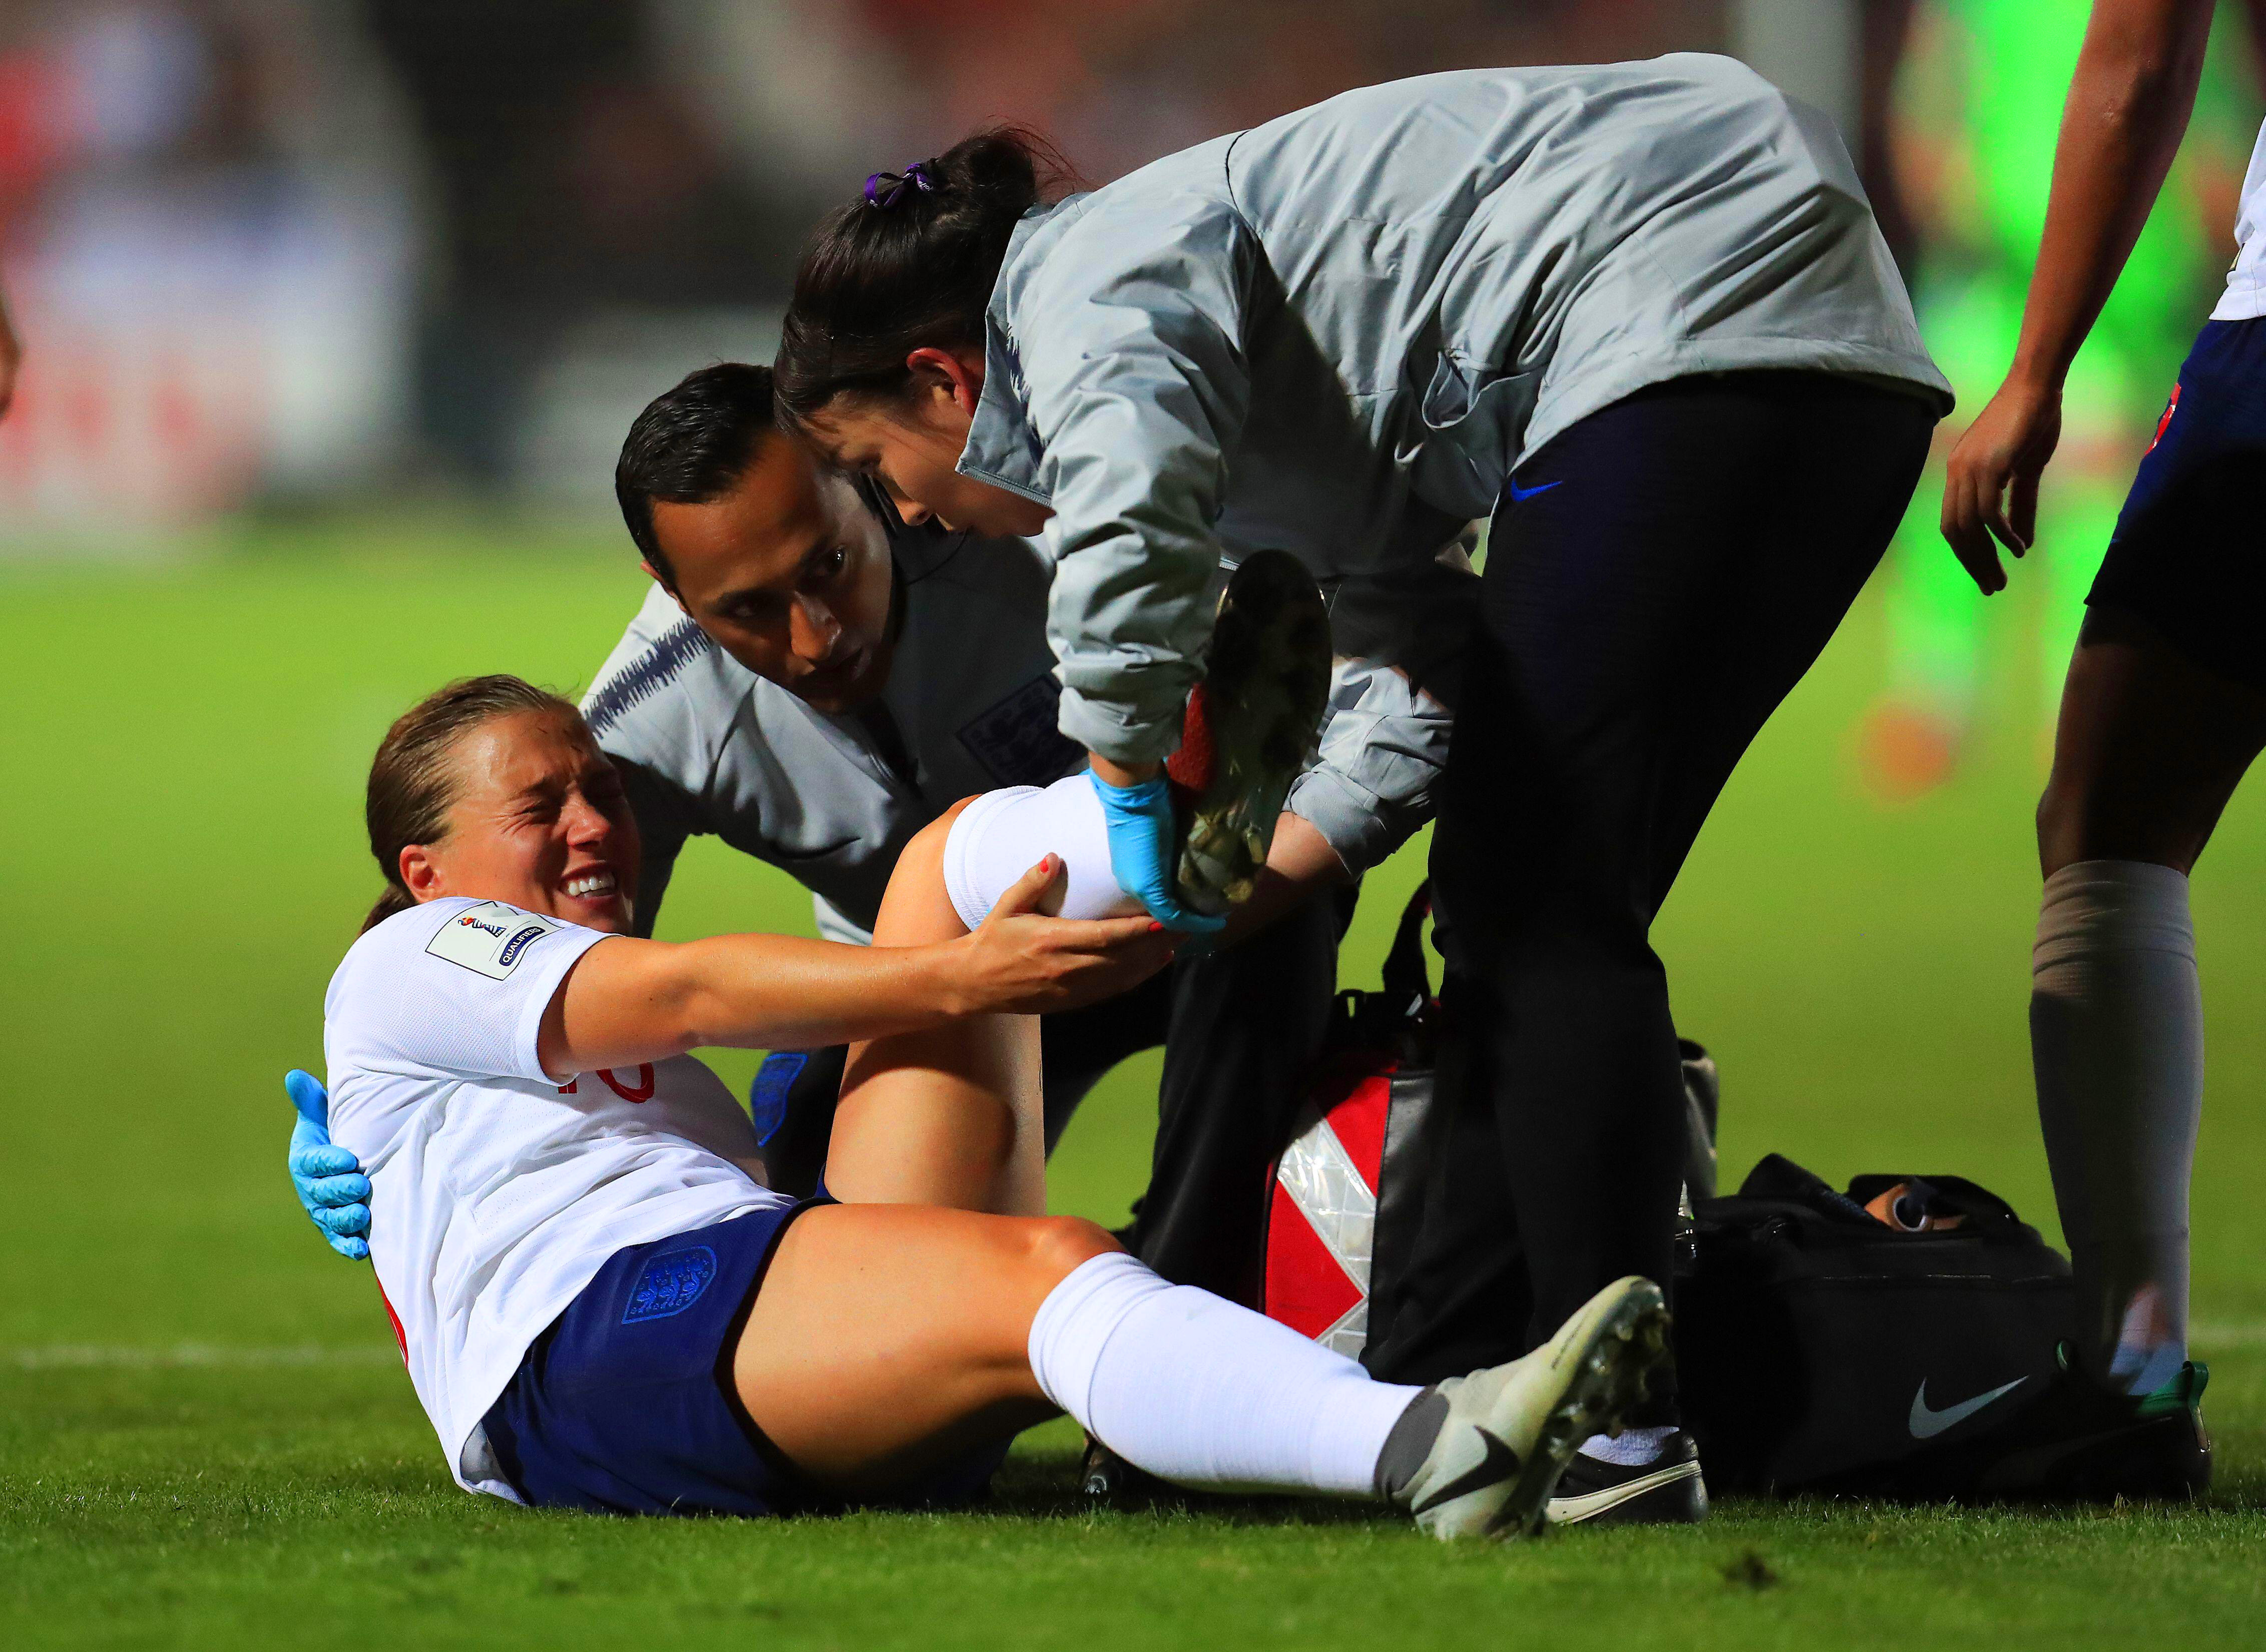 2023  Breast injuries are common for female athletes. Here's why